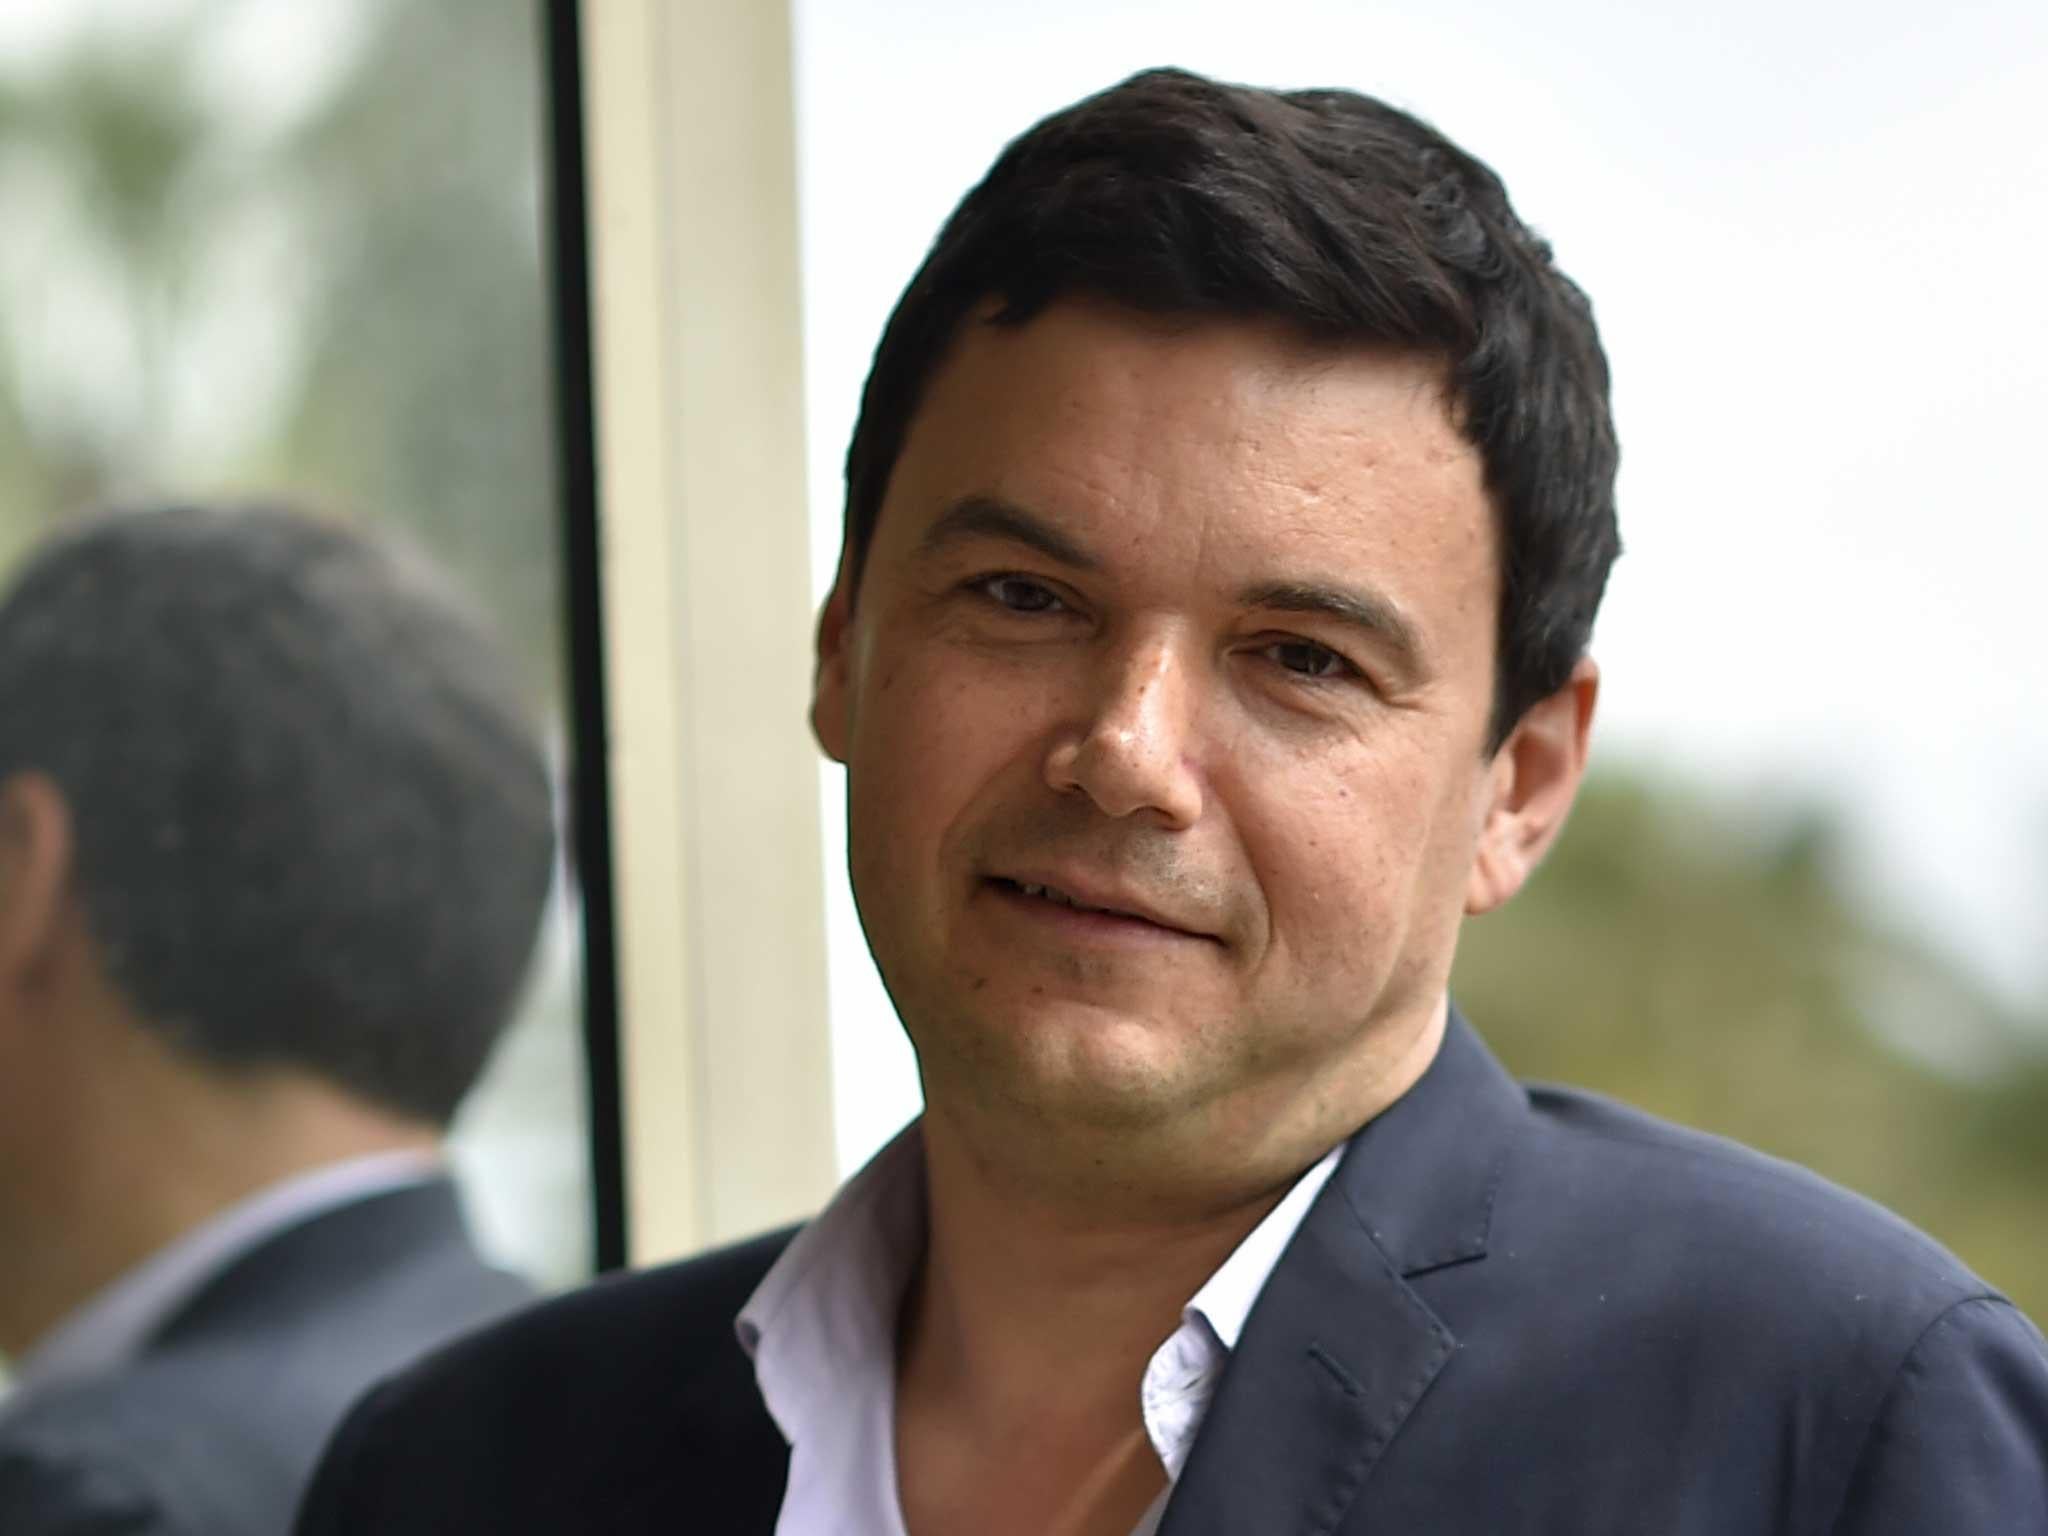 Thomas Piketty joined the Labour leader's economic council in September 2015